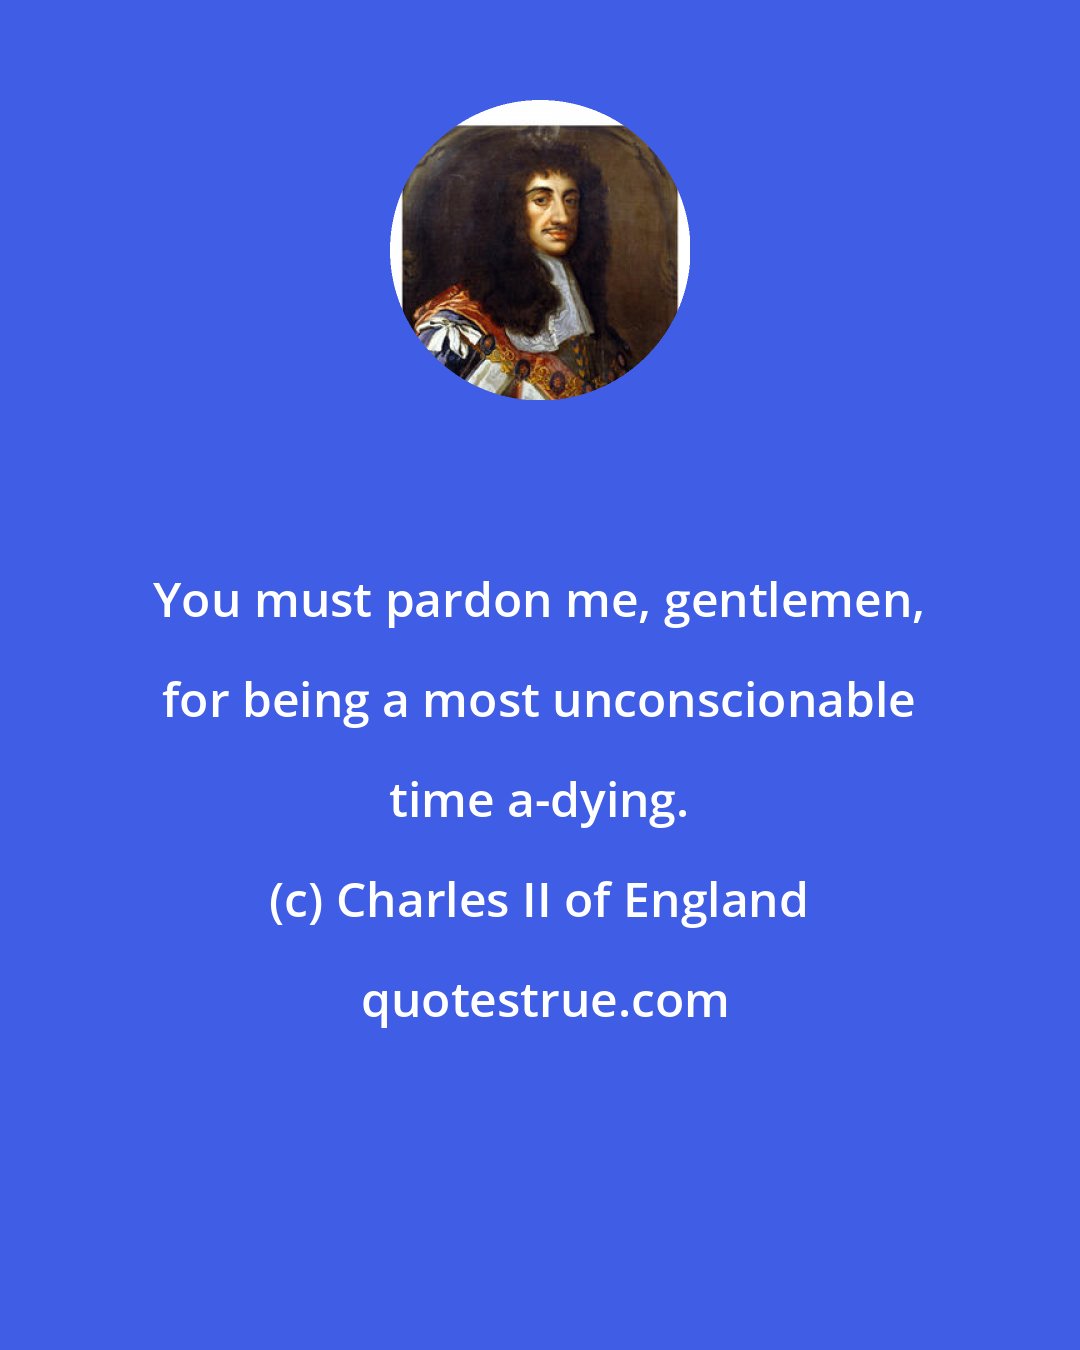 Charles II of England: You must pardon me, gentlemen, for being a most unconscionable time a-dying.